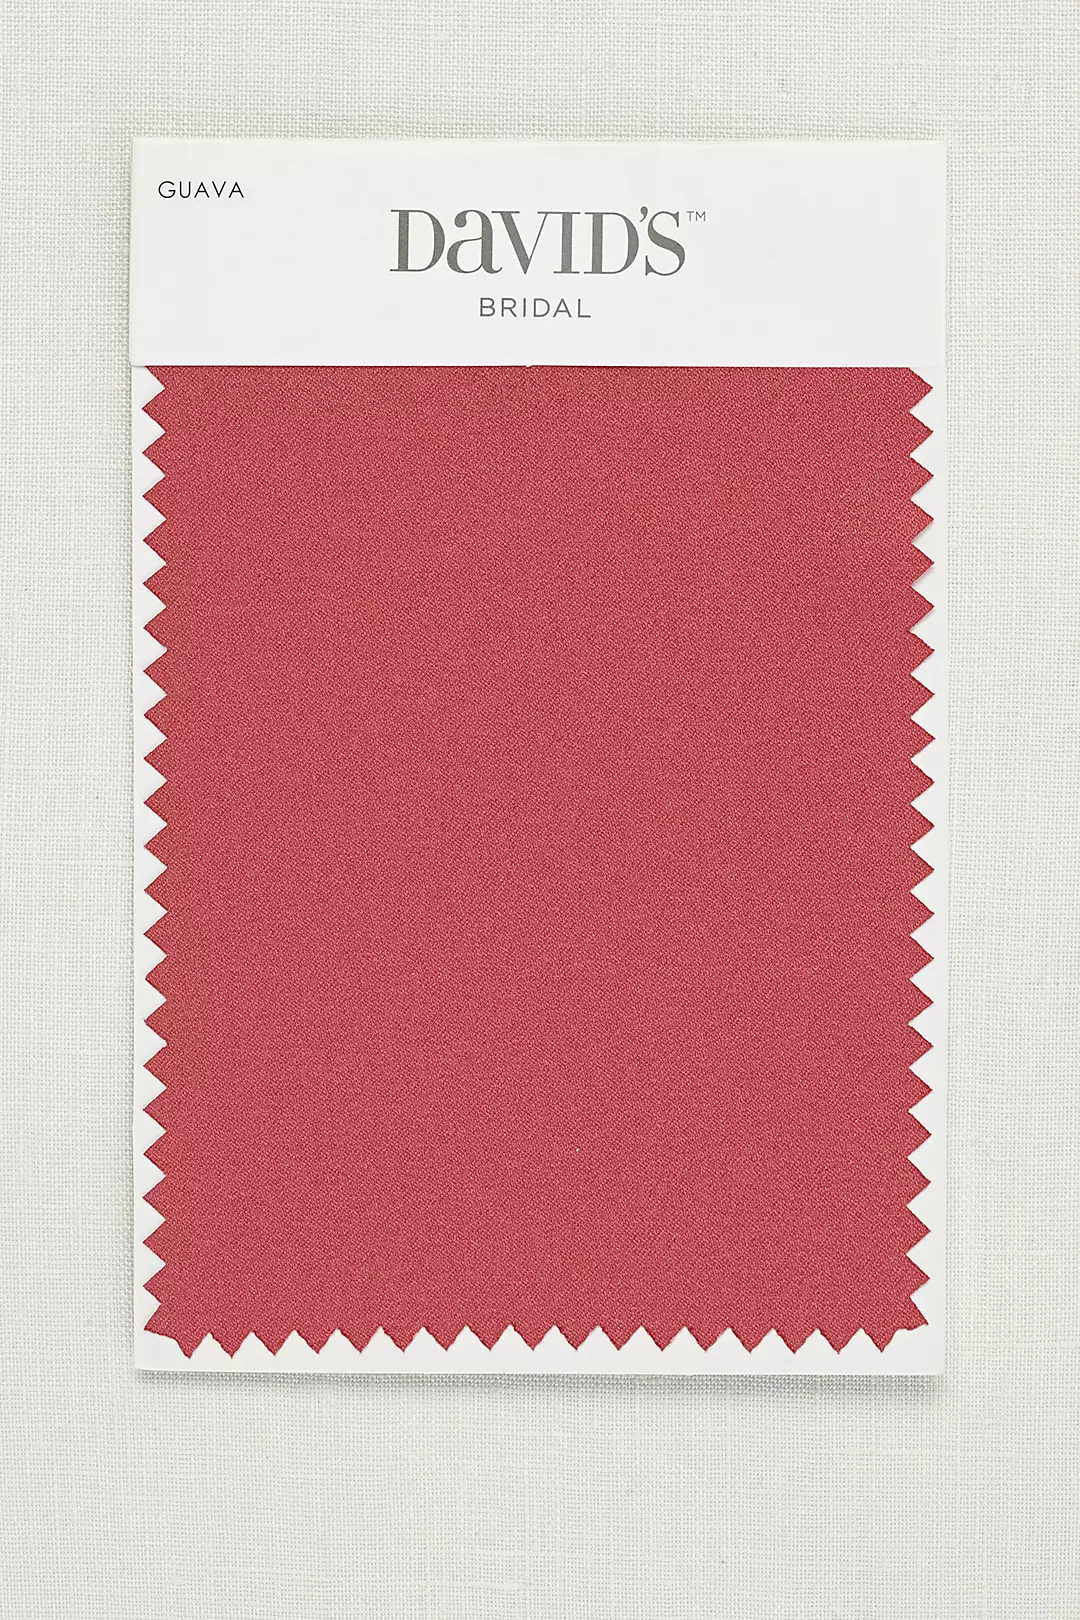 Guava Fabric Swatch Image